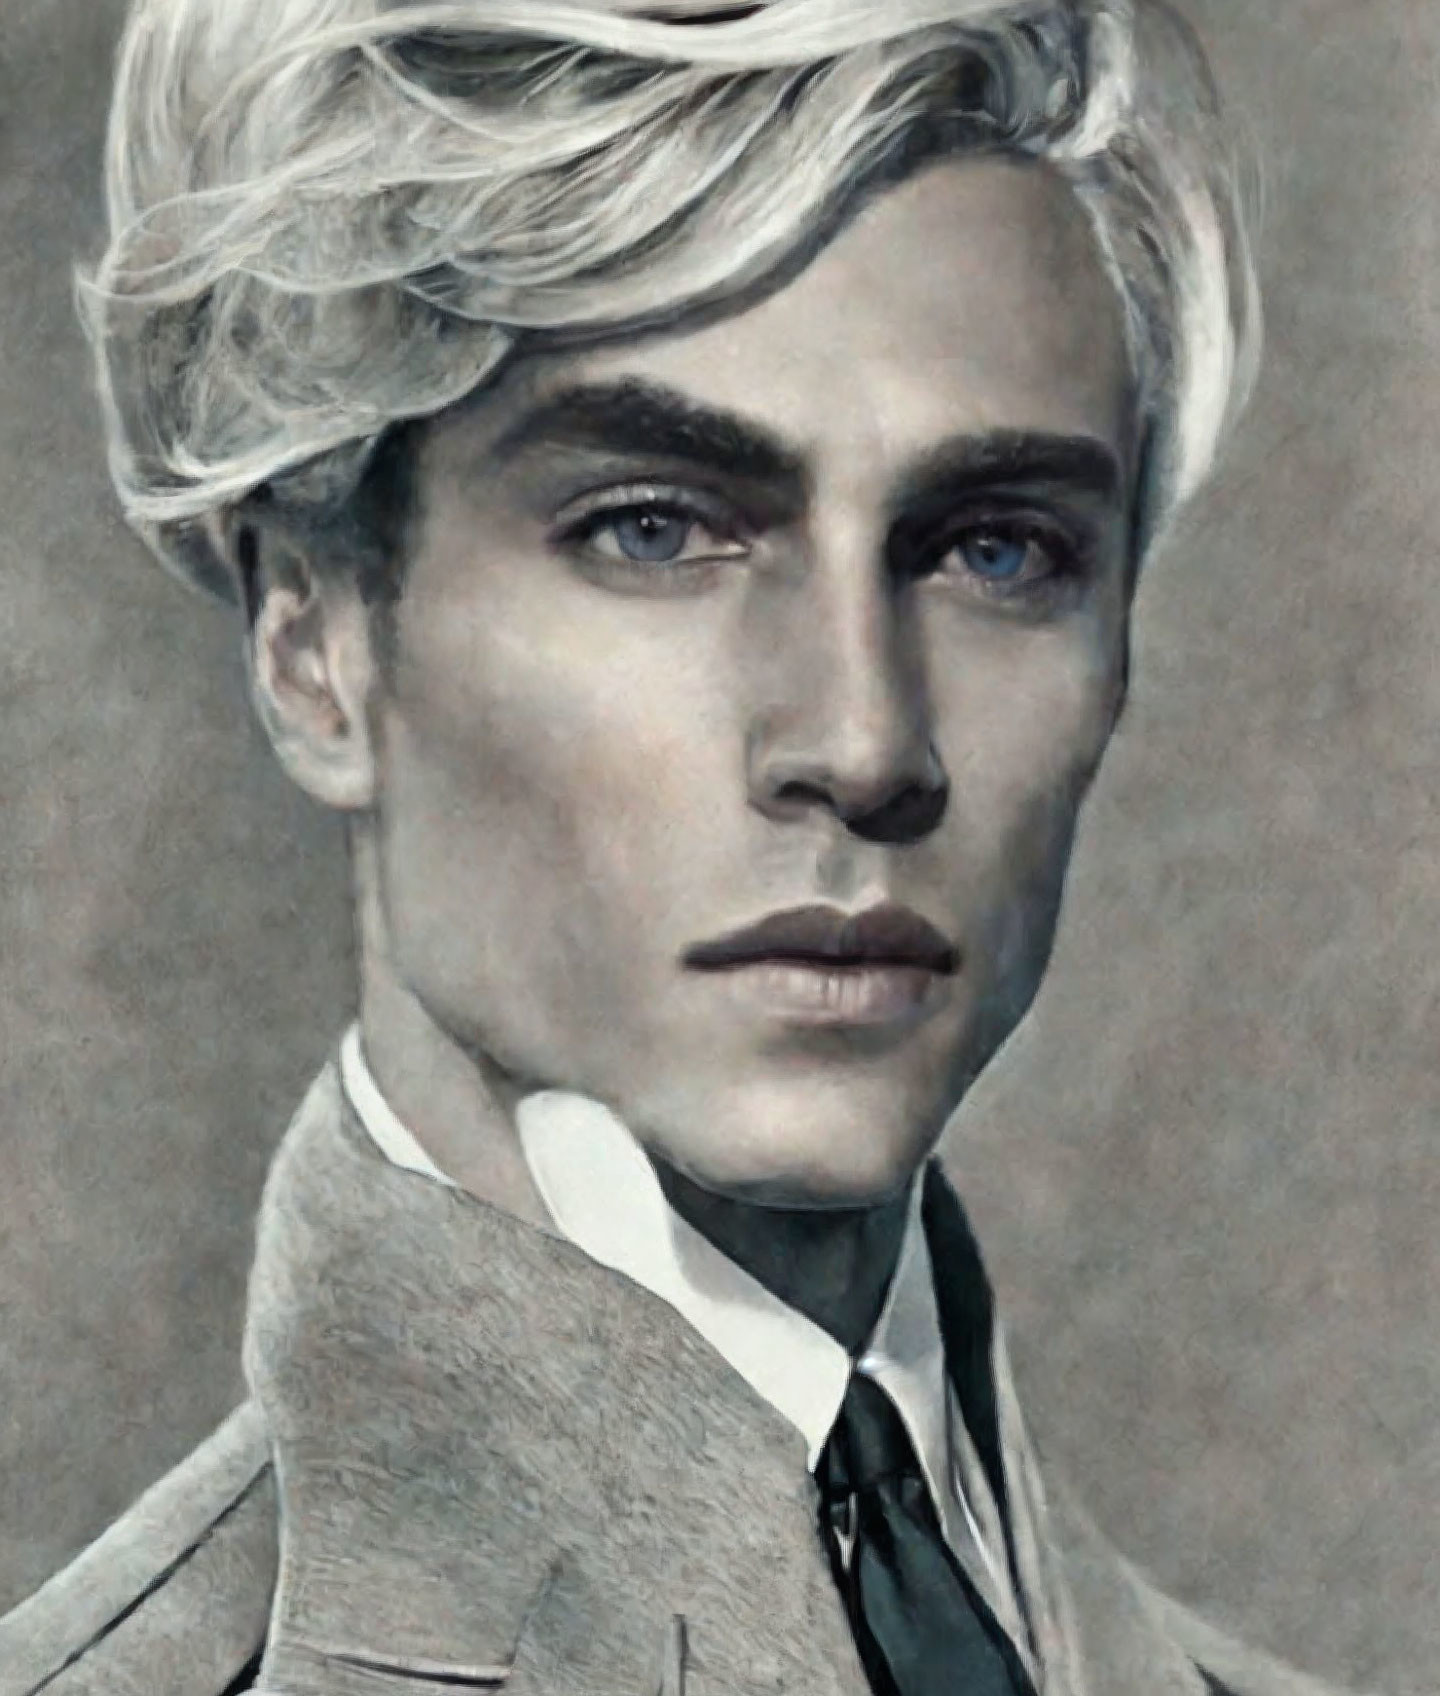 Young man with prominent cheekbones and wavy blond hair in monochromatic portrait